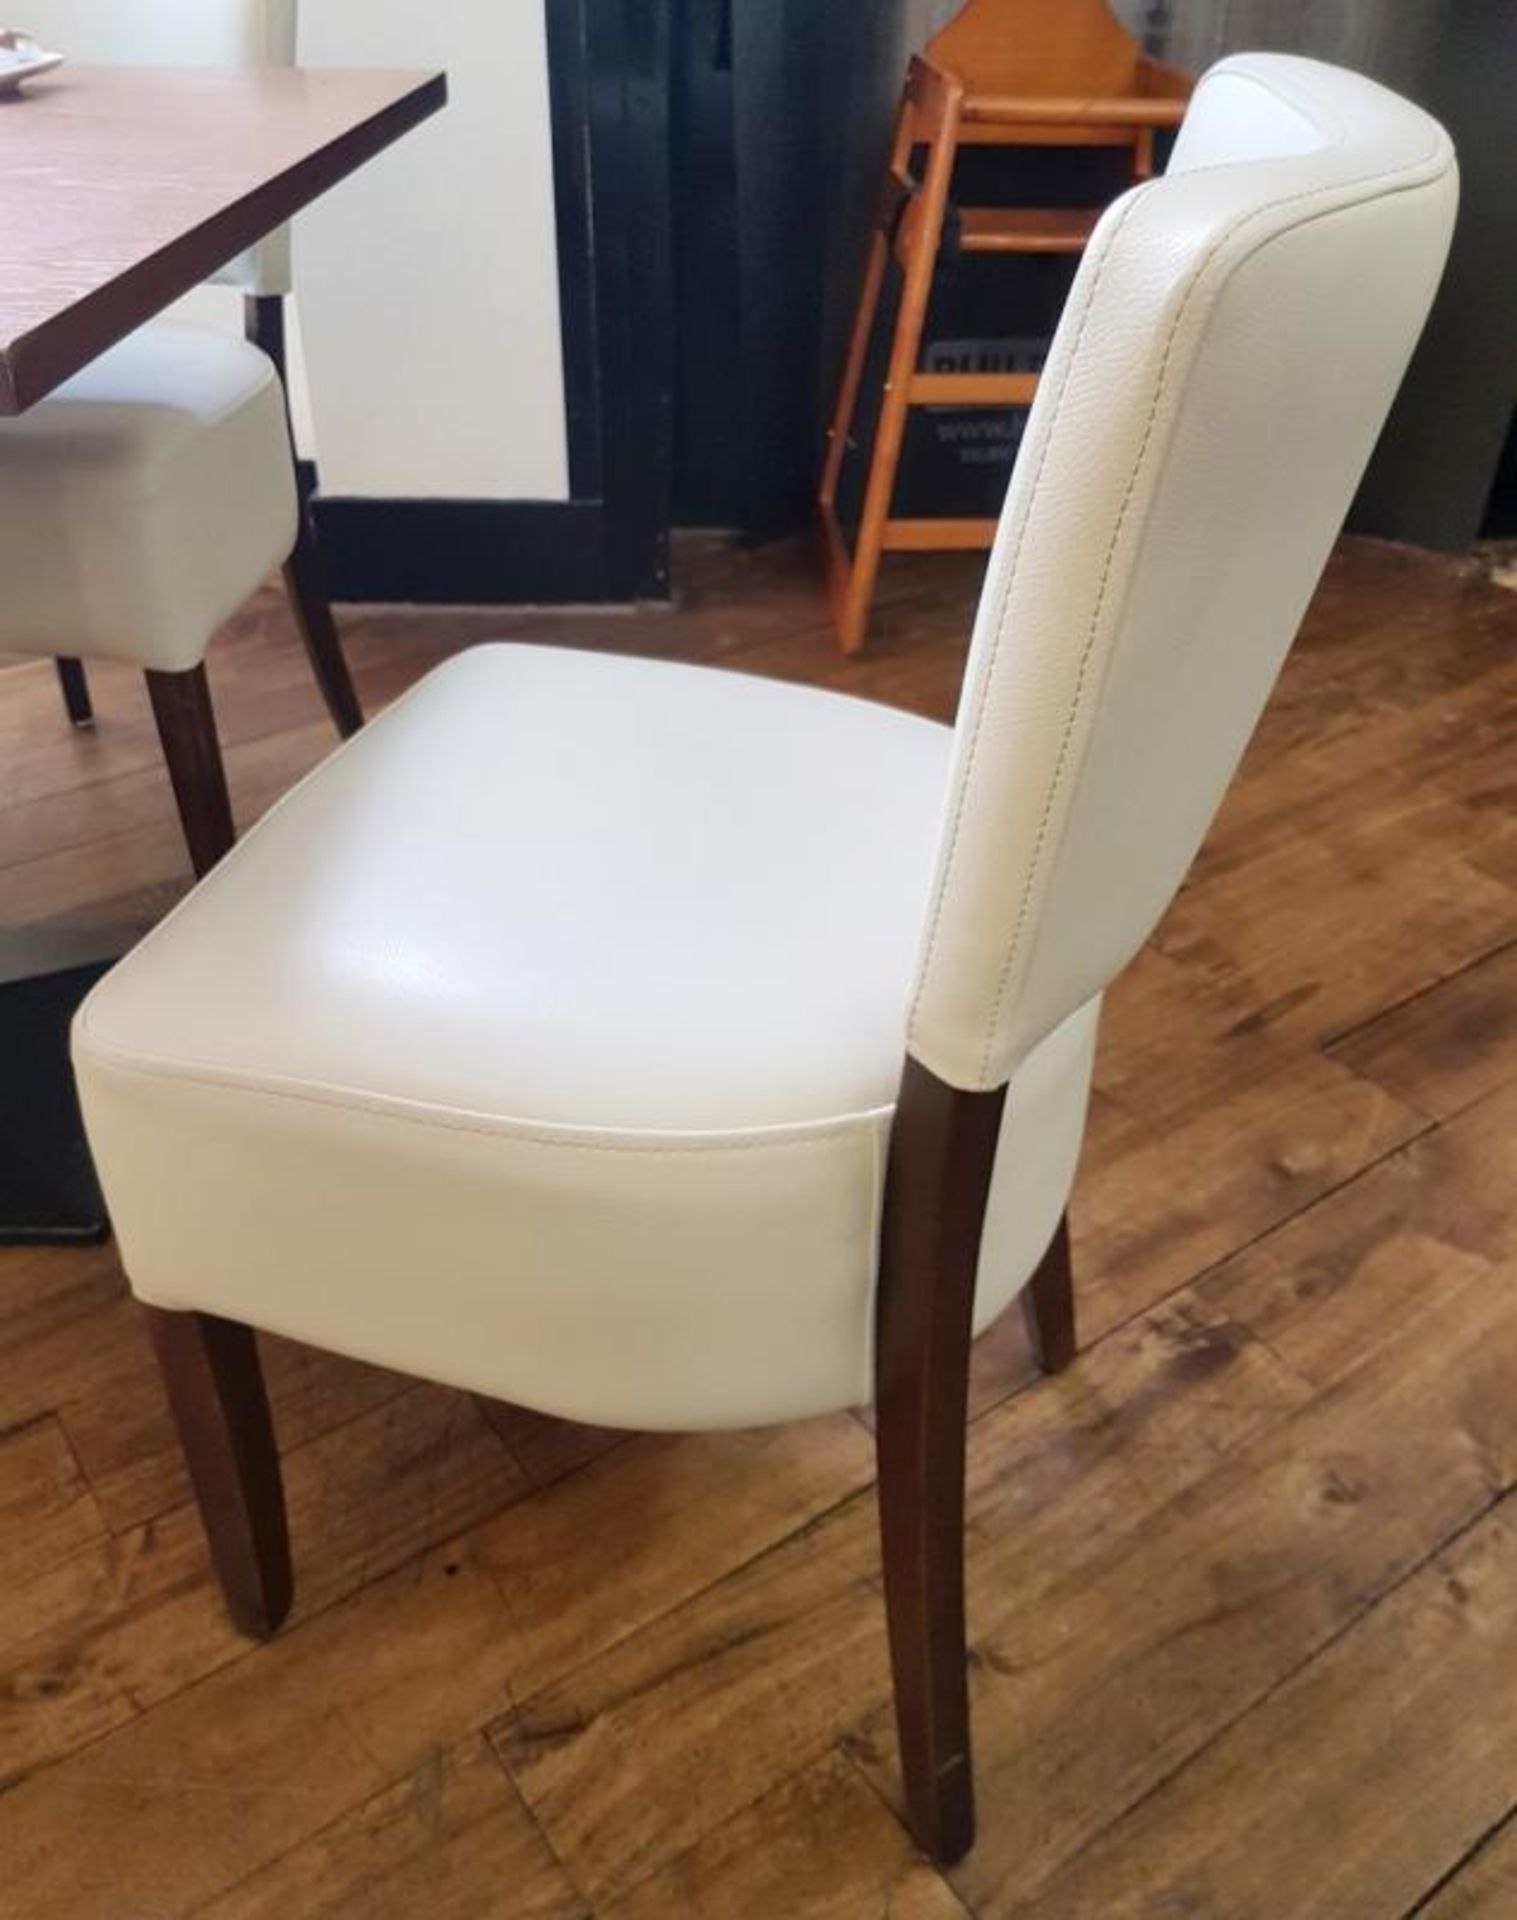 20 x Cream Faux Leather Chairs From Restaurant - Ref: KR20 - CL345 - Location: Altrincham - Image 5 of 5